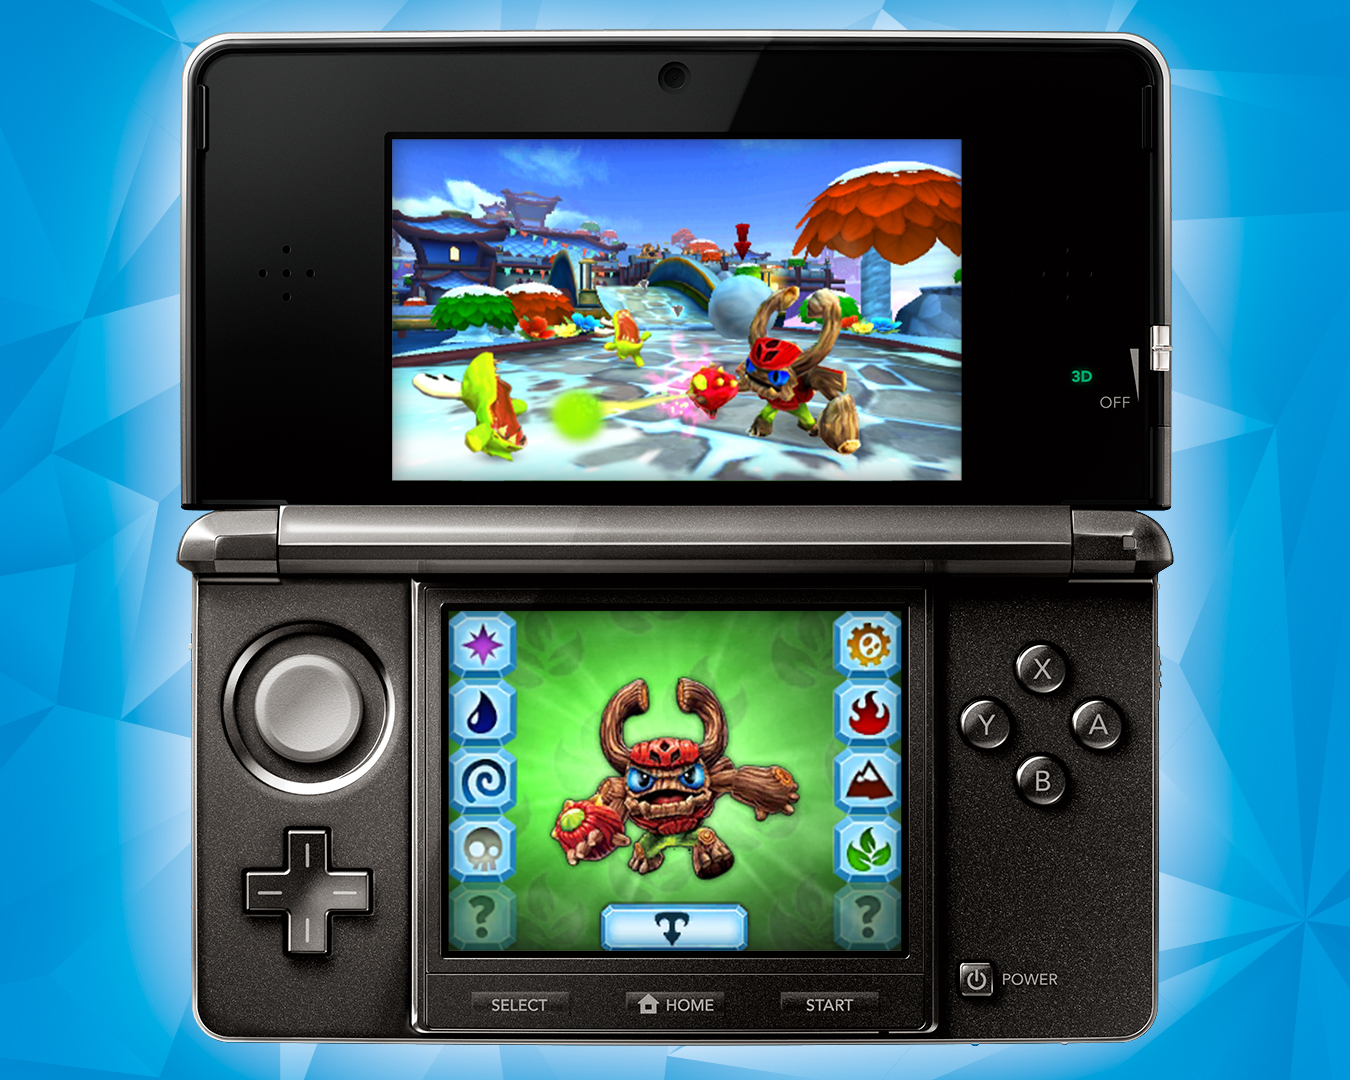 Trap Team™ for Nintendo 3DS™ Lets Portal Masters Conquer and Play as Villains on the Go | Business Wire